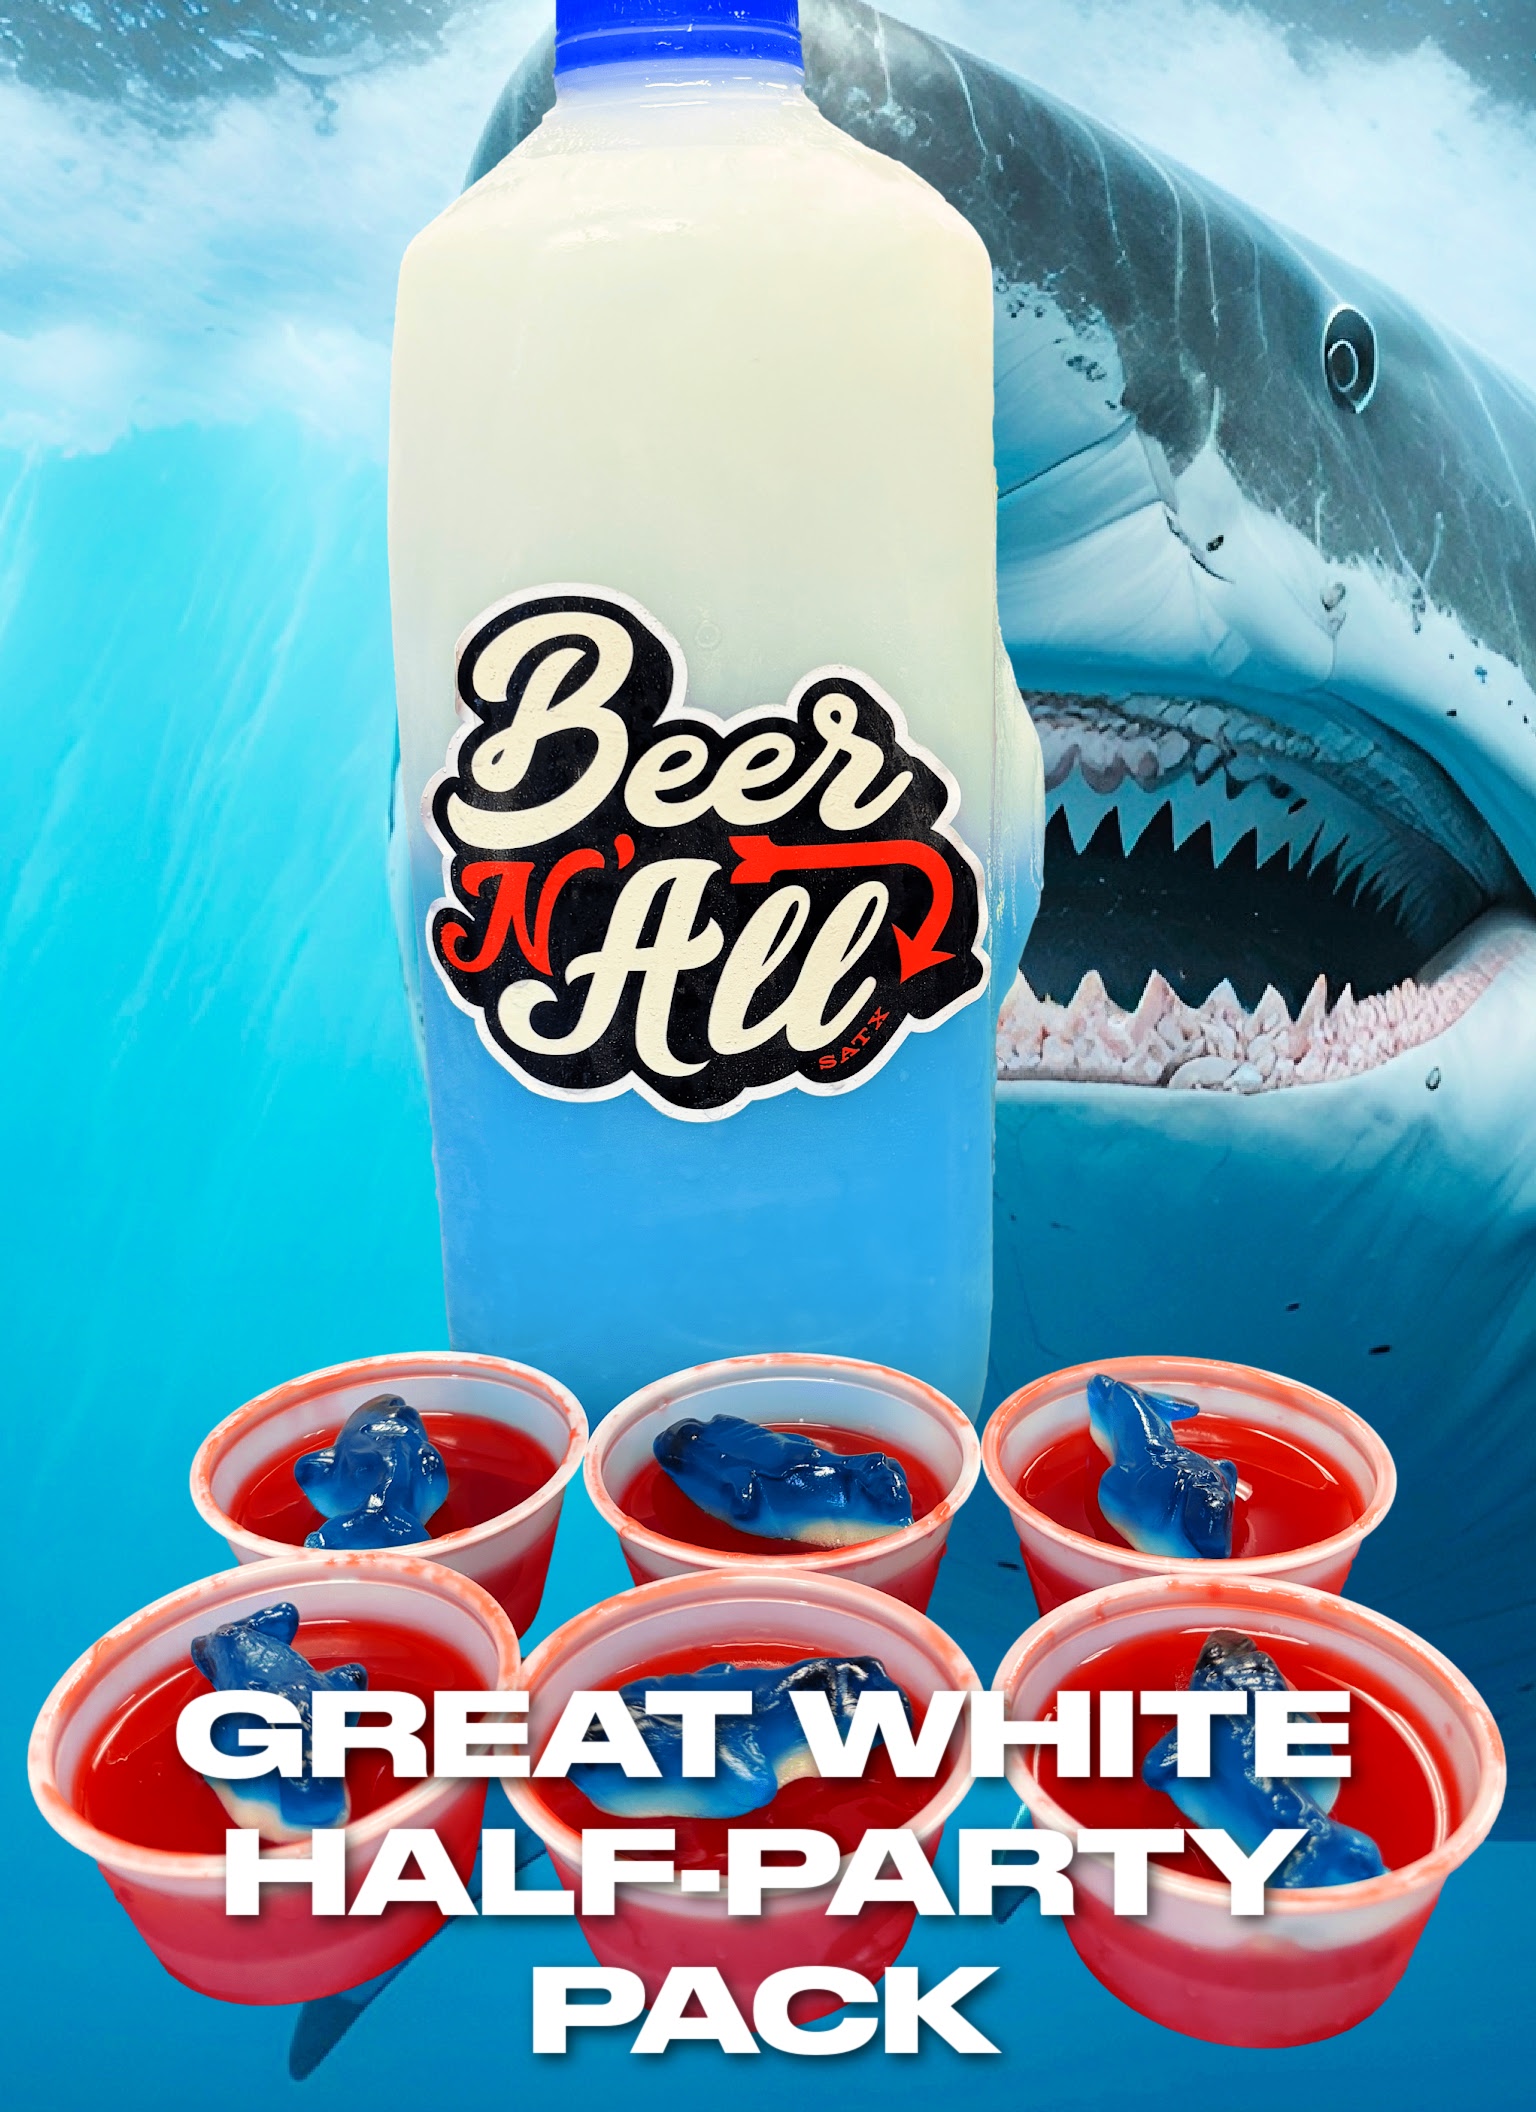 Great White Half-Party Pack